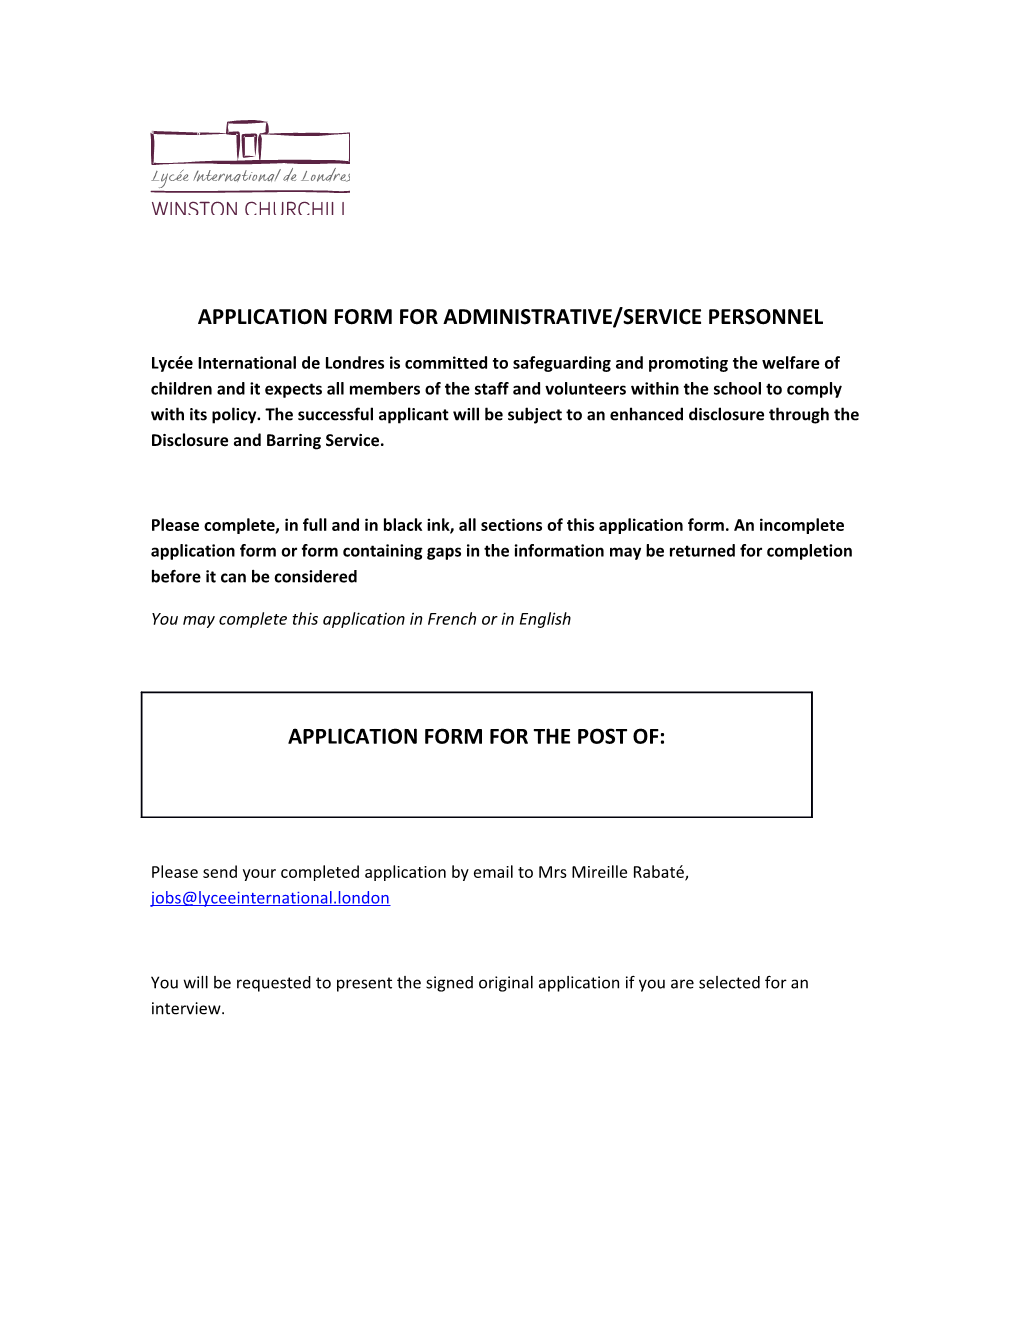 Application Form for Administrative/Service Personnel